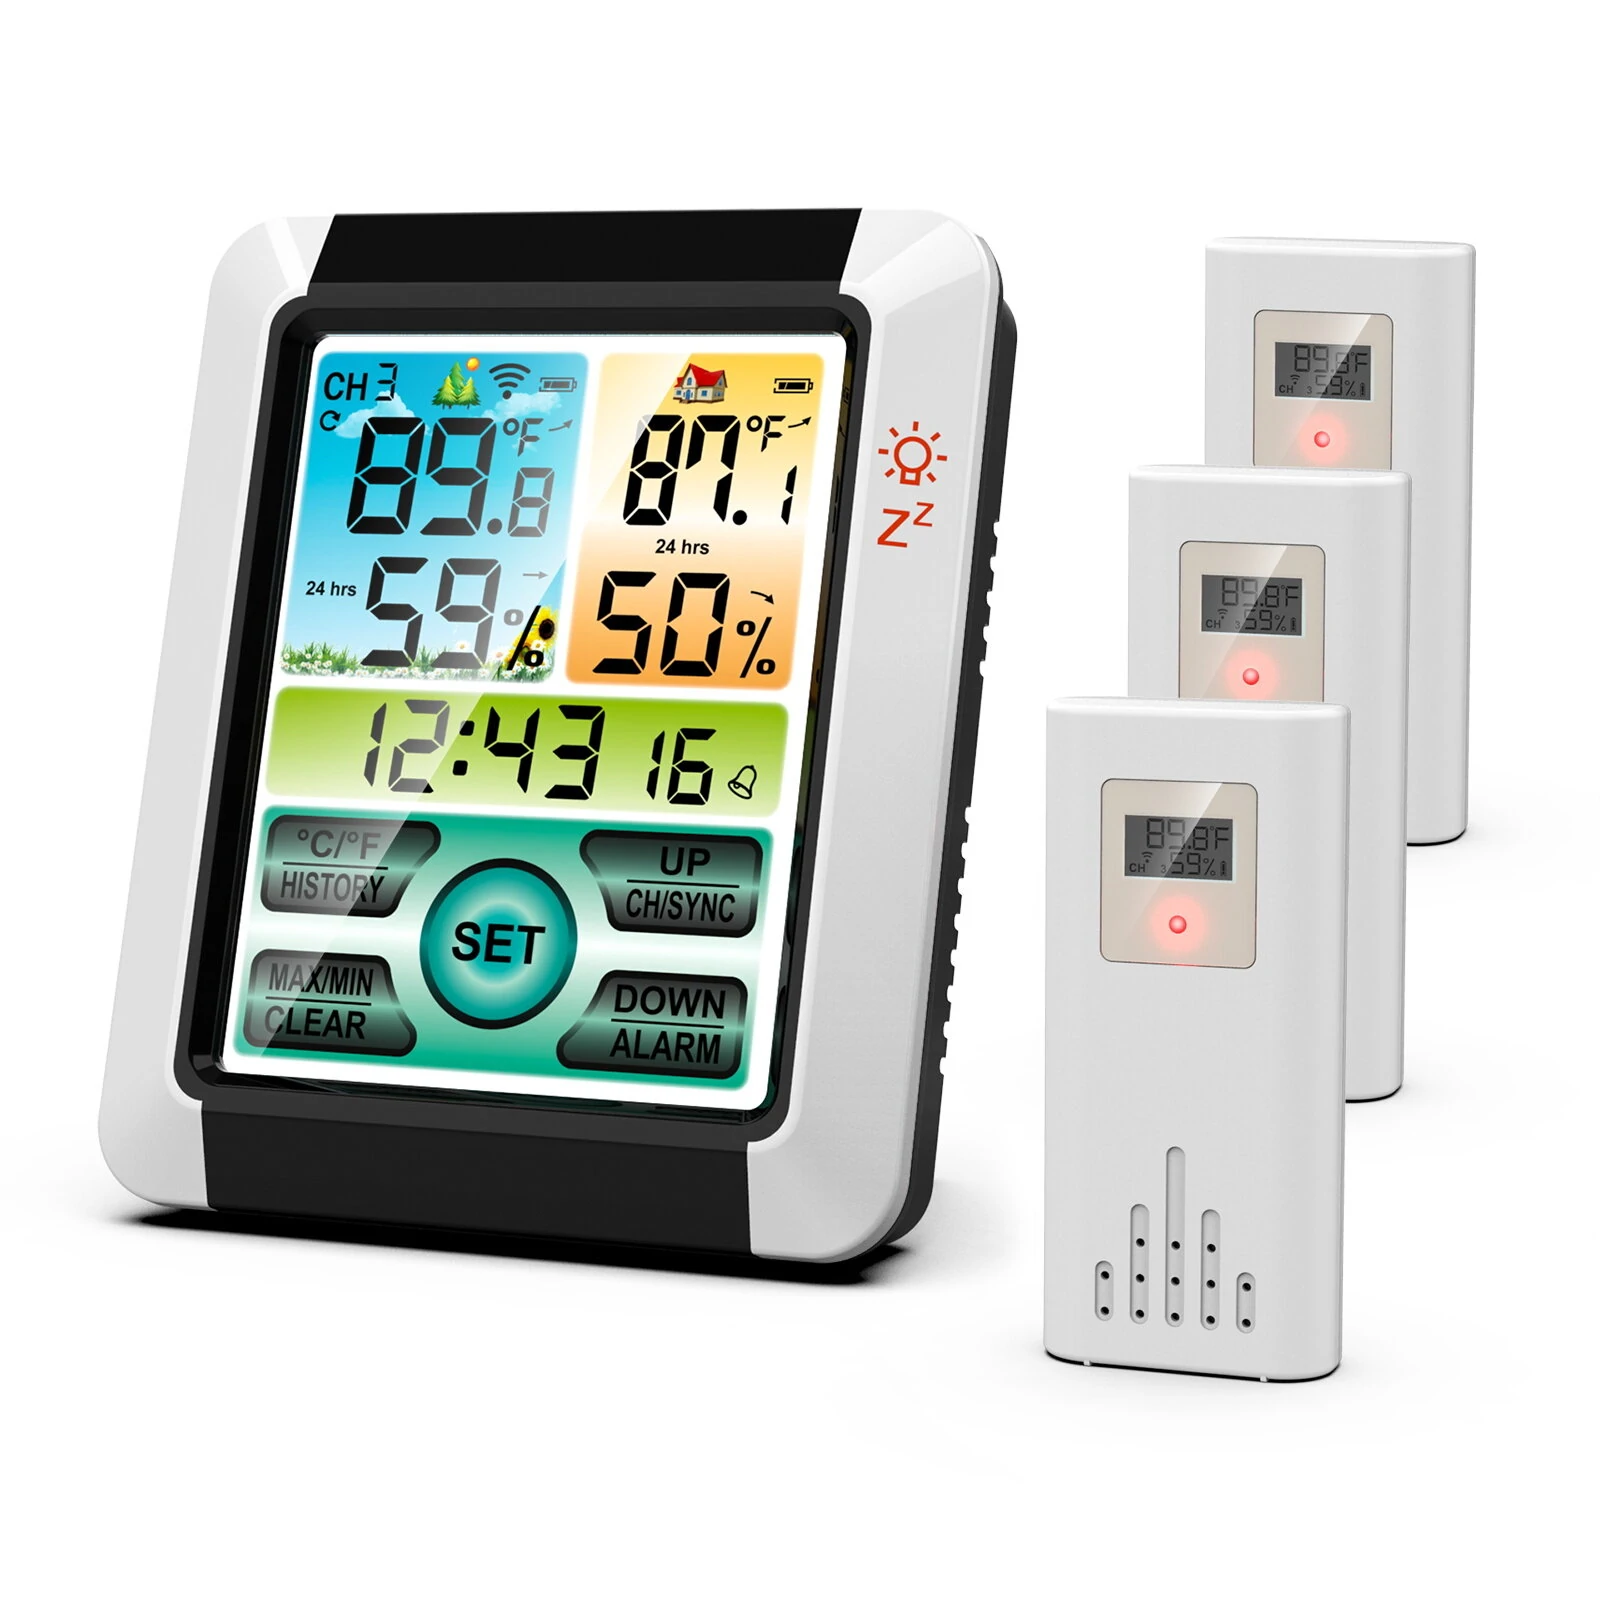 AGSIVO weather station with three sensors - you can even stick it on the fridge